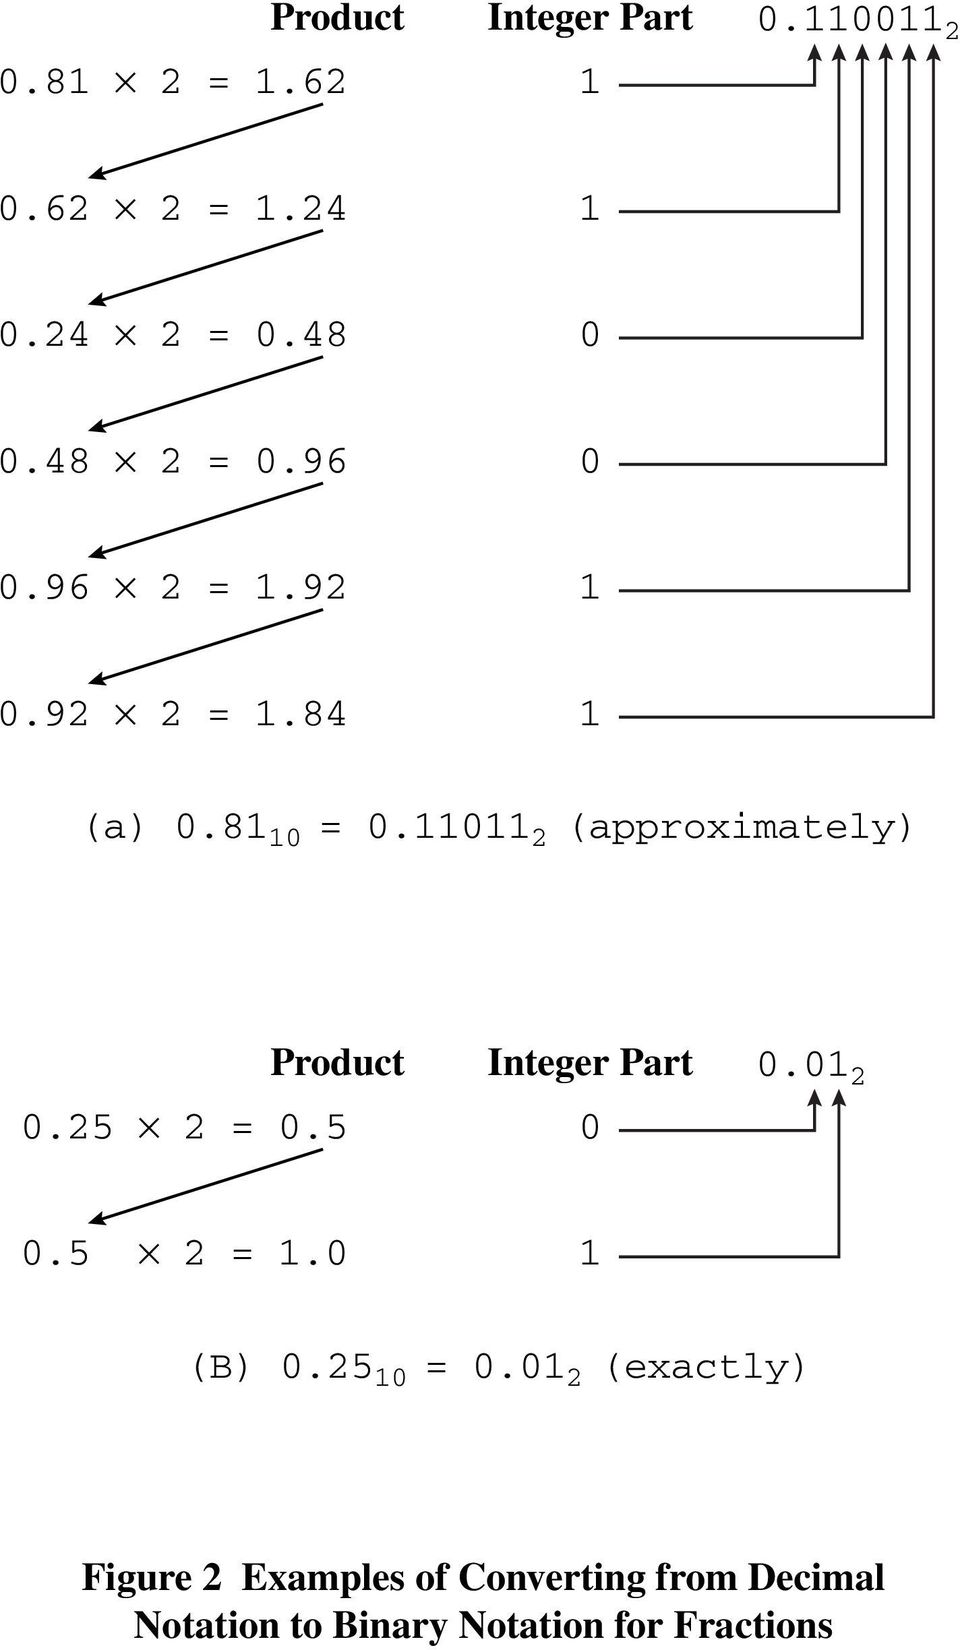 11011 (approximately) Product Integer Part 0.5 = 0.5 0 0.01 0.5 = 1.